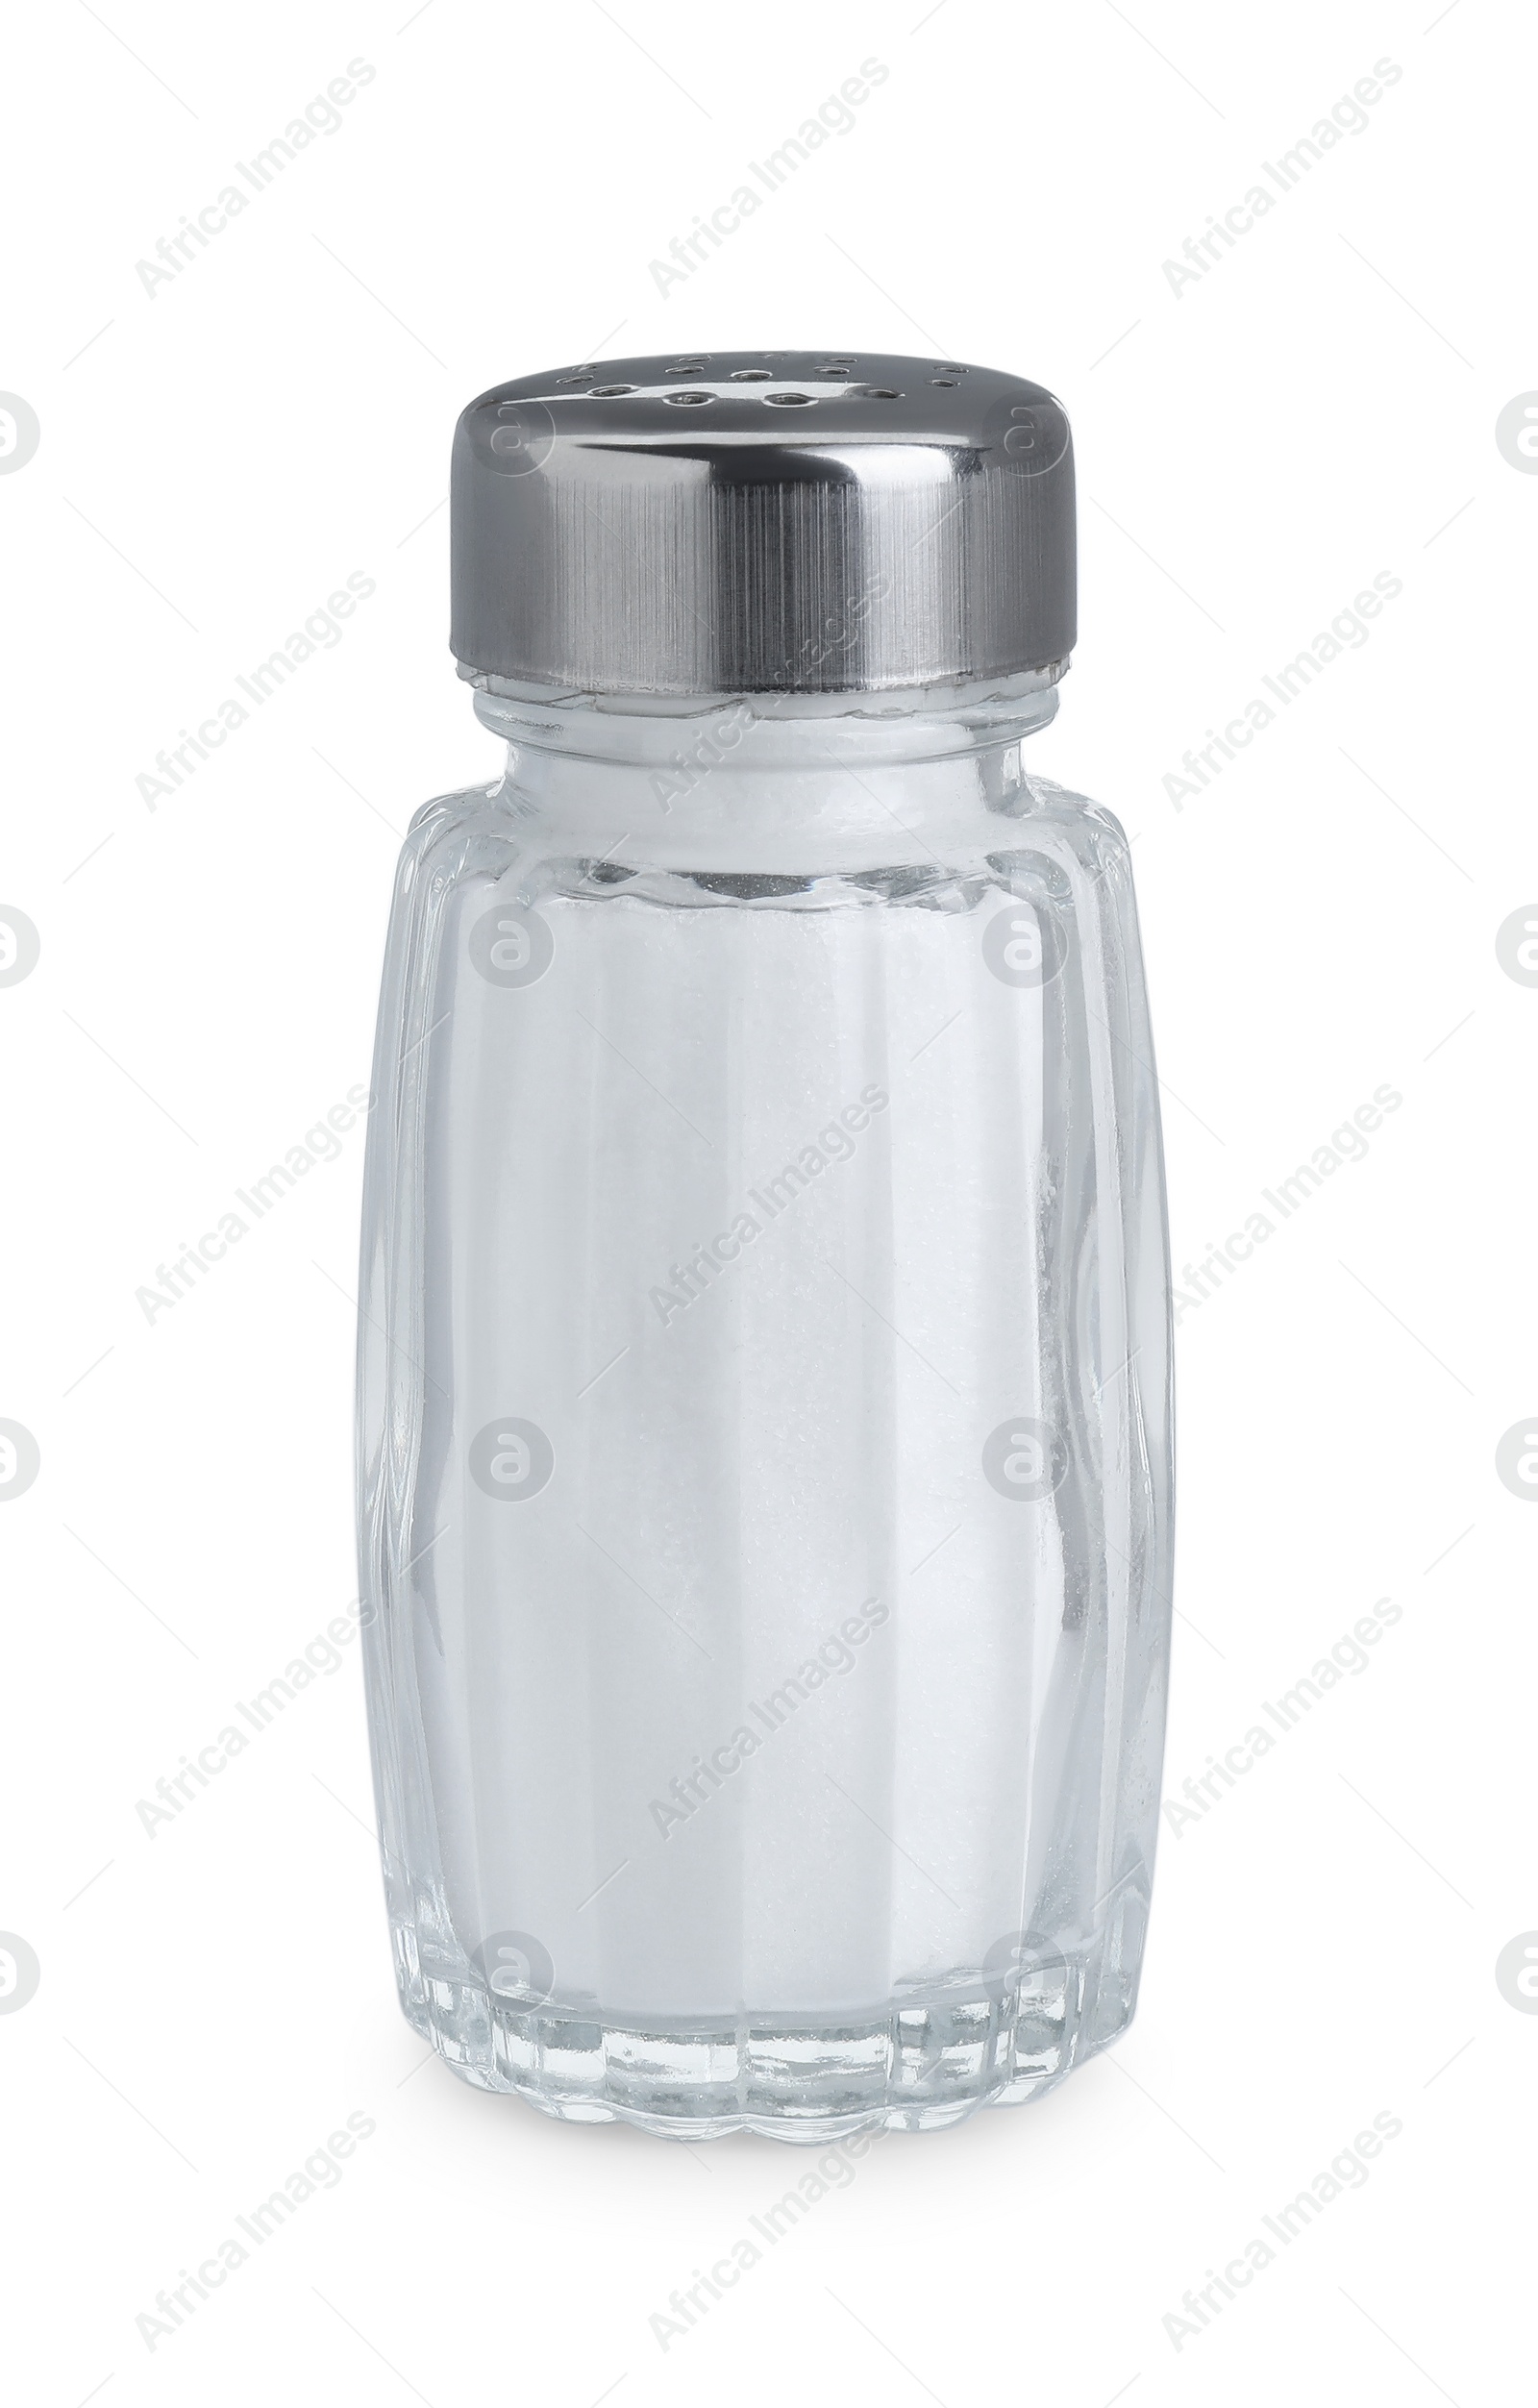 Photo of One glass salt shaker isolated on white